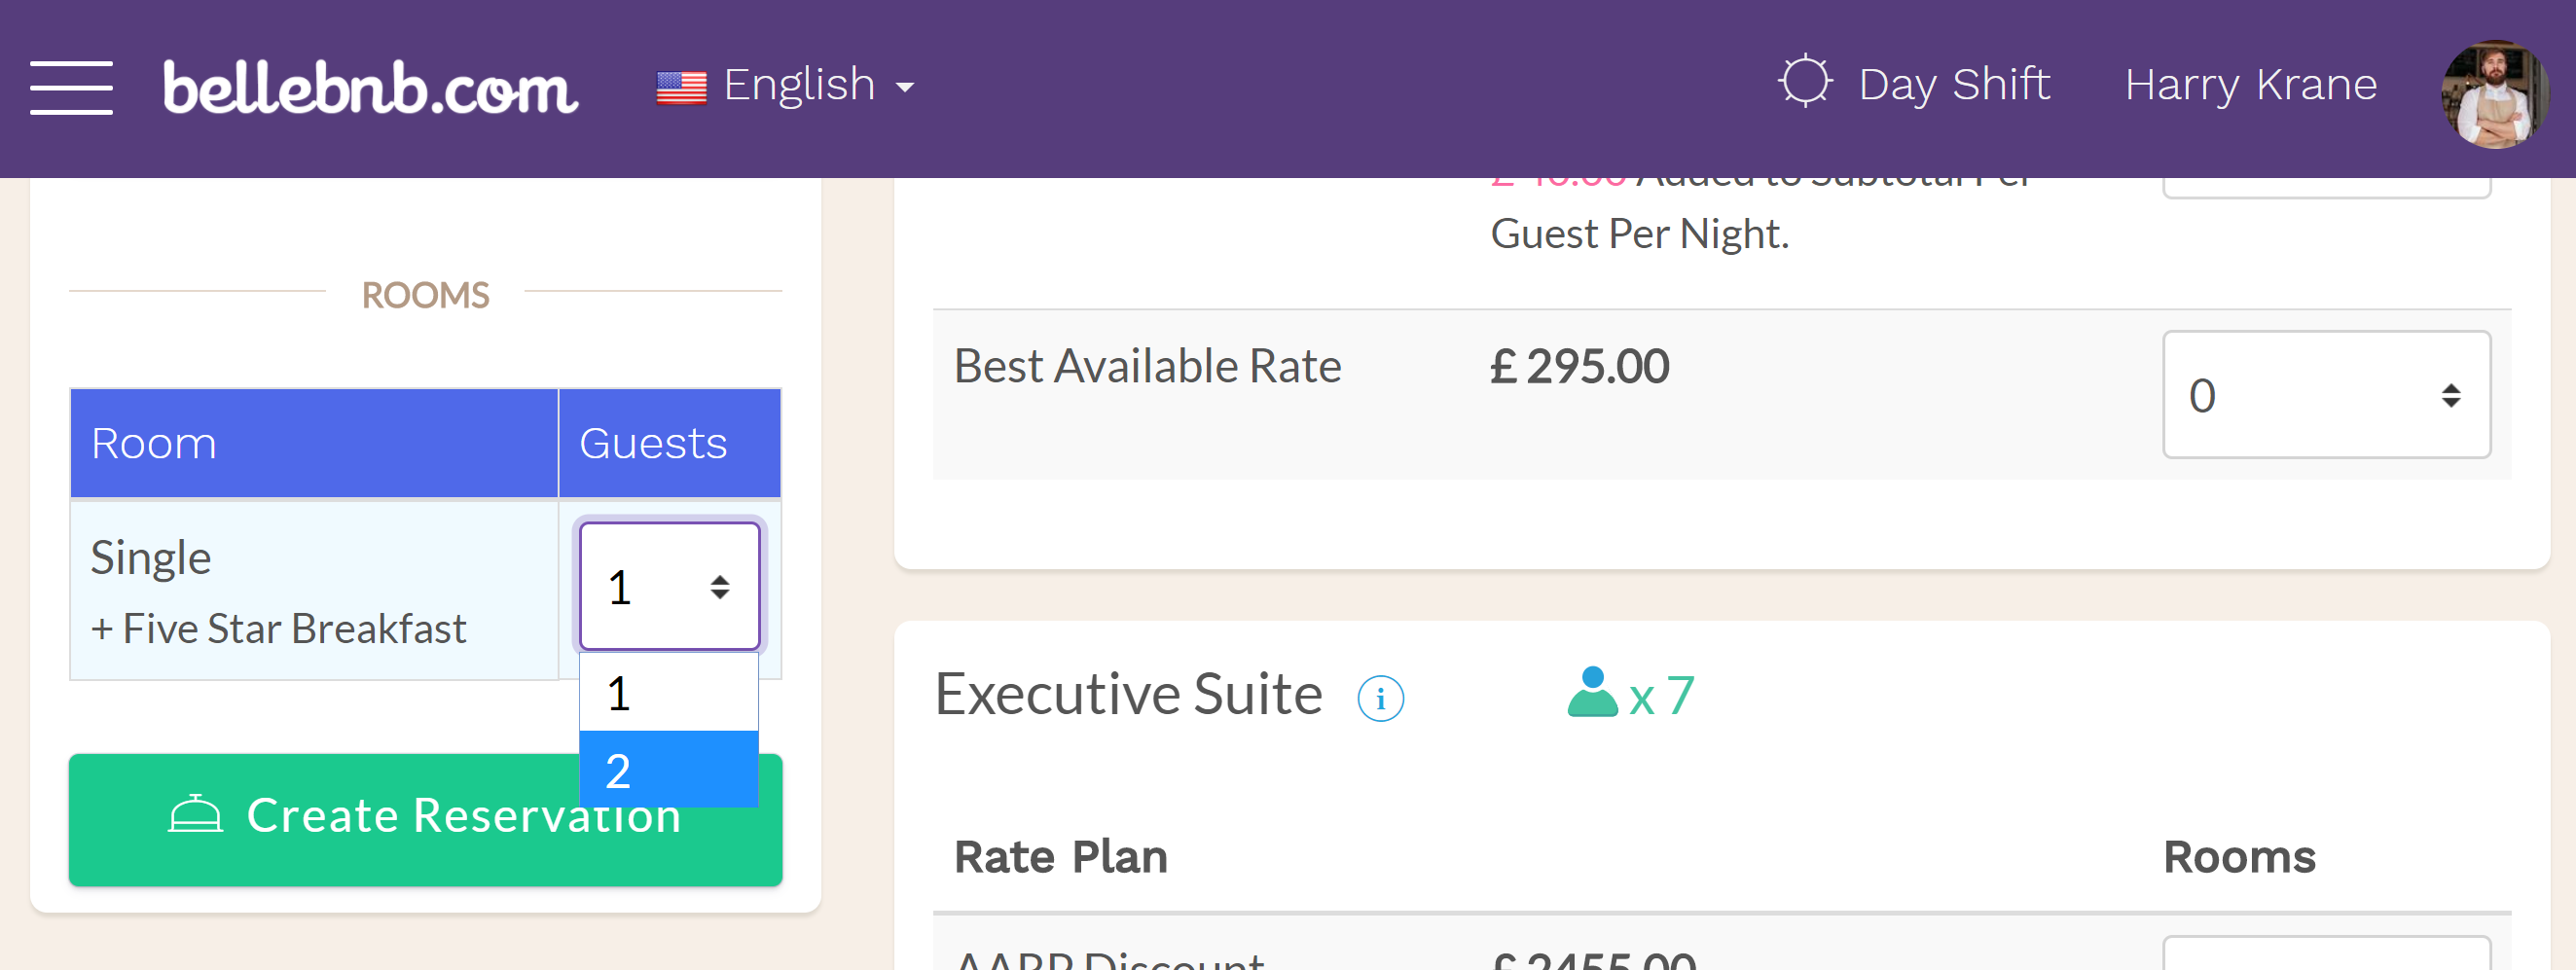 Selecting more than 1 room in the ‘Guests/Rooms’ menu will allow you to add multiple rooms to a reservation. Using the ‘Rooms’ dropdown, add rooms to your reservation. If you are using Rate Plans (c.f., FAQ) you will be presented with the available rooms at each available rate.